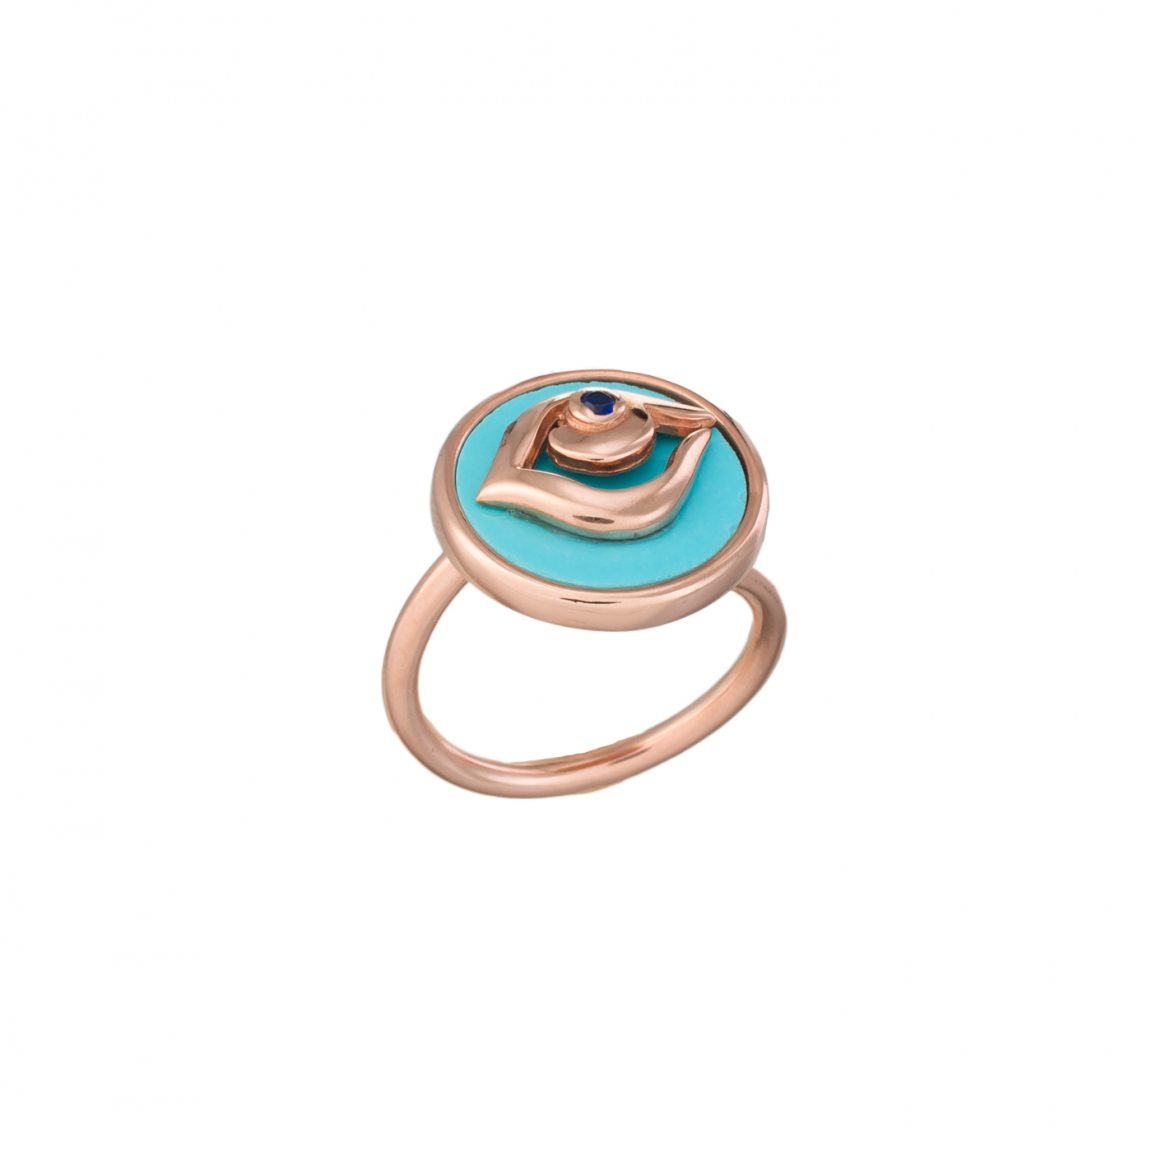 Gold-plated eye ring with turquoise